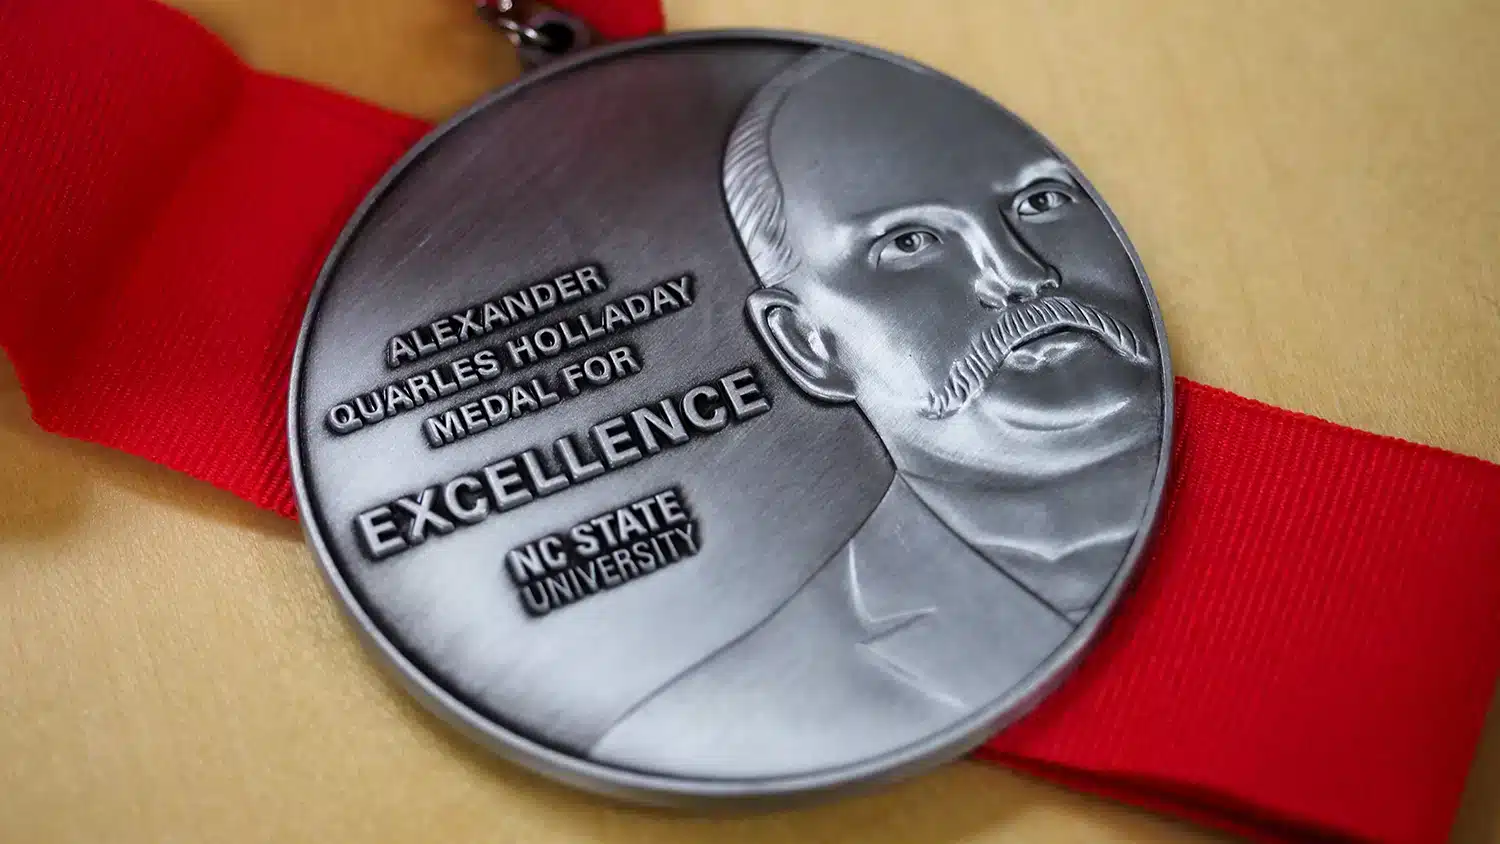 The Alexander Quarles Holladay Medal for Excellence, the highest honor given by NC State.